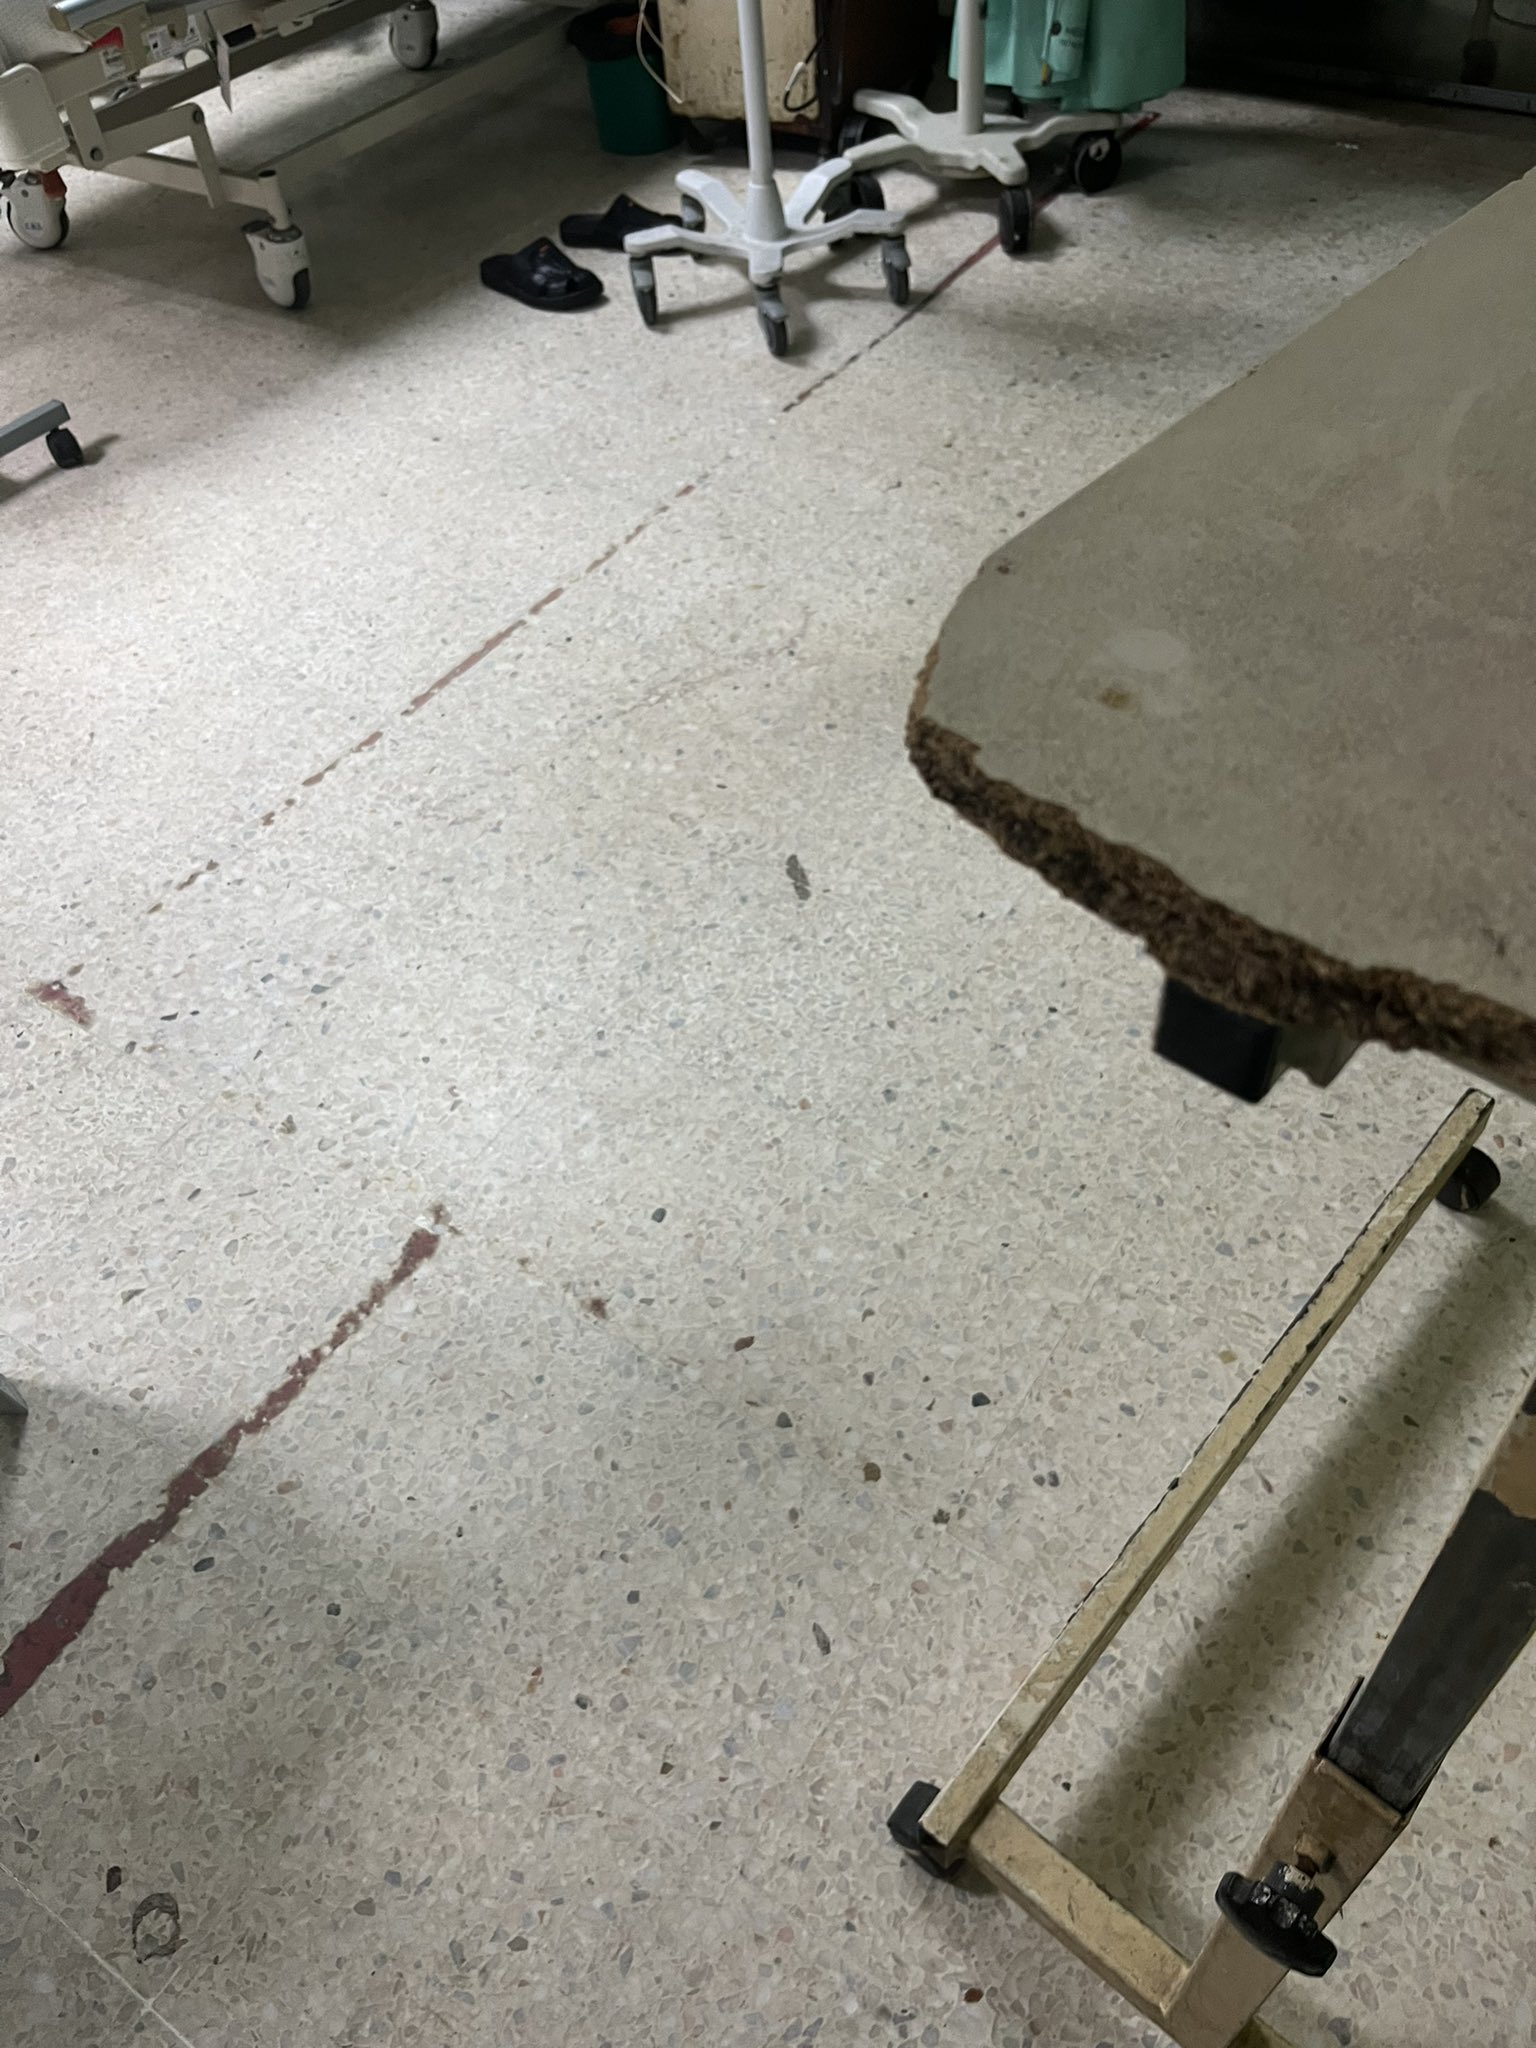 A cracked table in a government hospital at johor